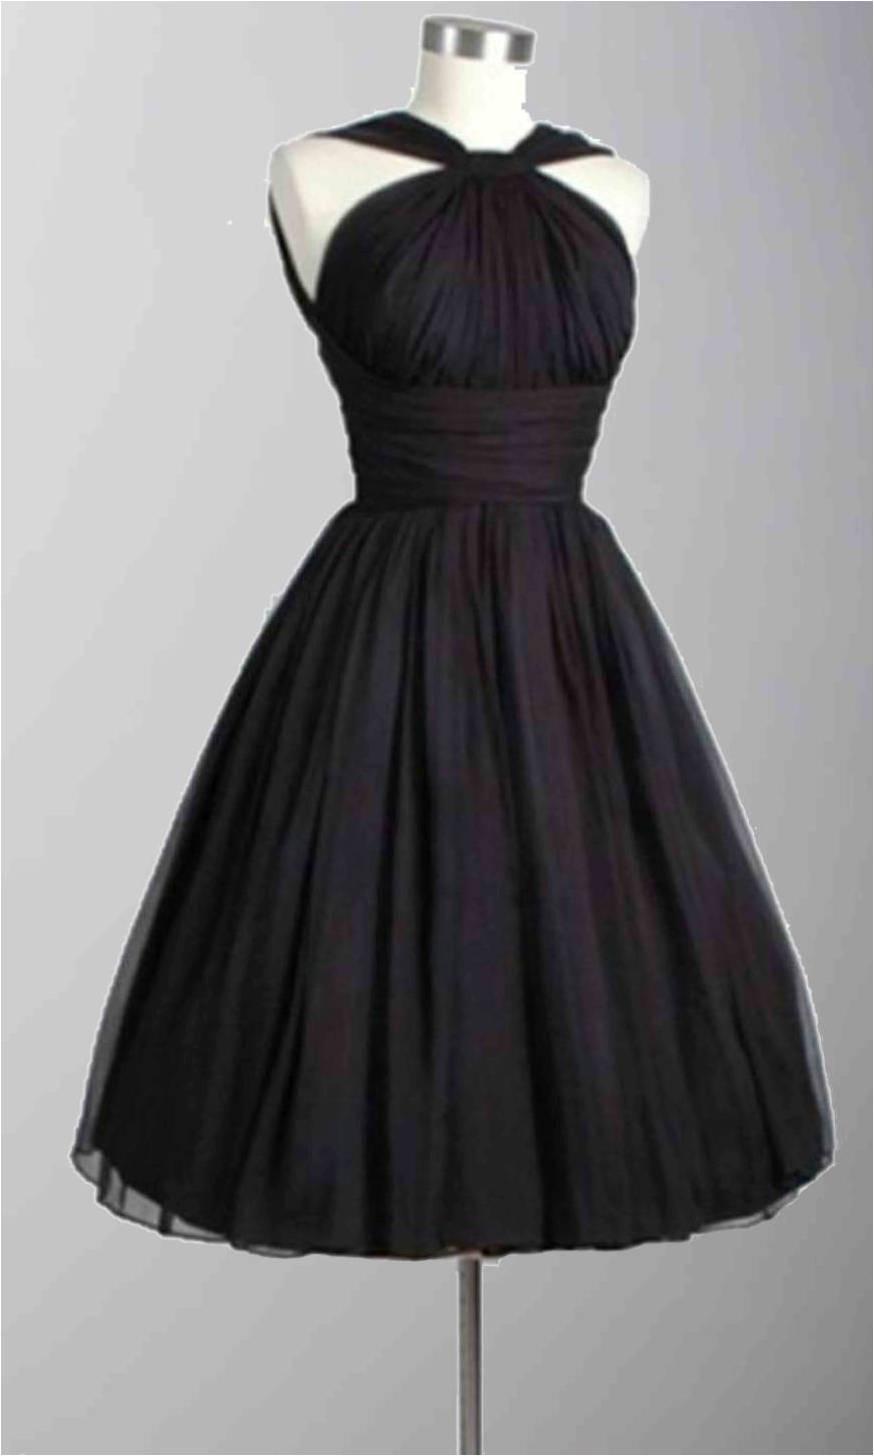 Mariage - Black Halter Ruching Waist Short Cocktail Dresses Bridesmaid Dress KSP309 [KSP309] - £83.00 : Cheap Prom Dresses Uk, Bridesmaid Dresses, 2014 Prom & Evening Dresses, Look for cheap elegant prom dresses 2014, cocktail gowns, or dresses for special occasion